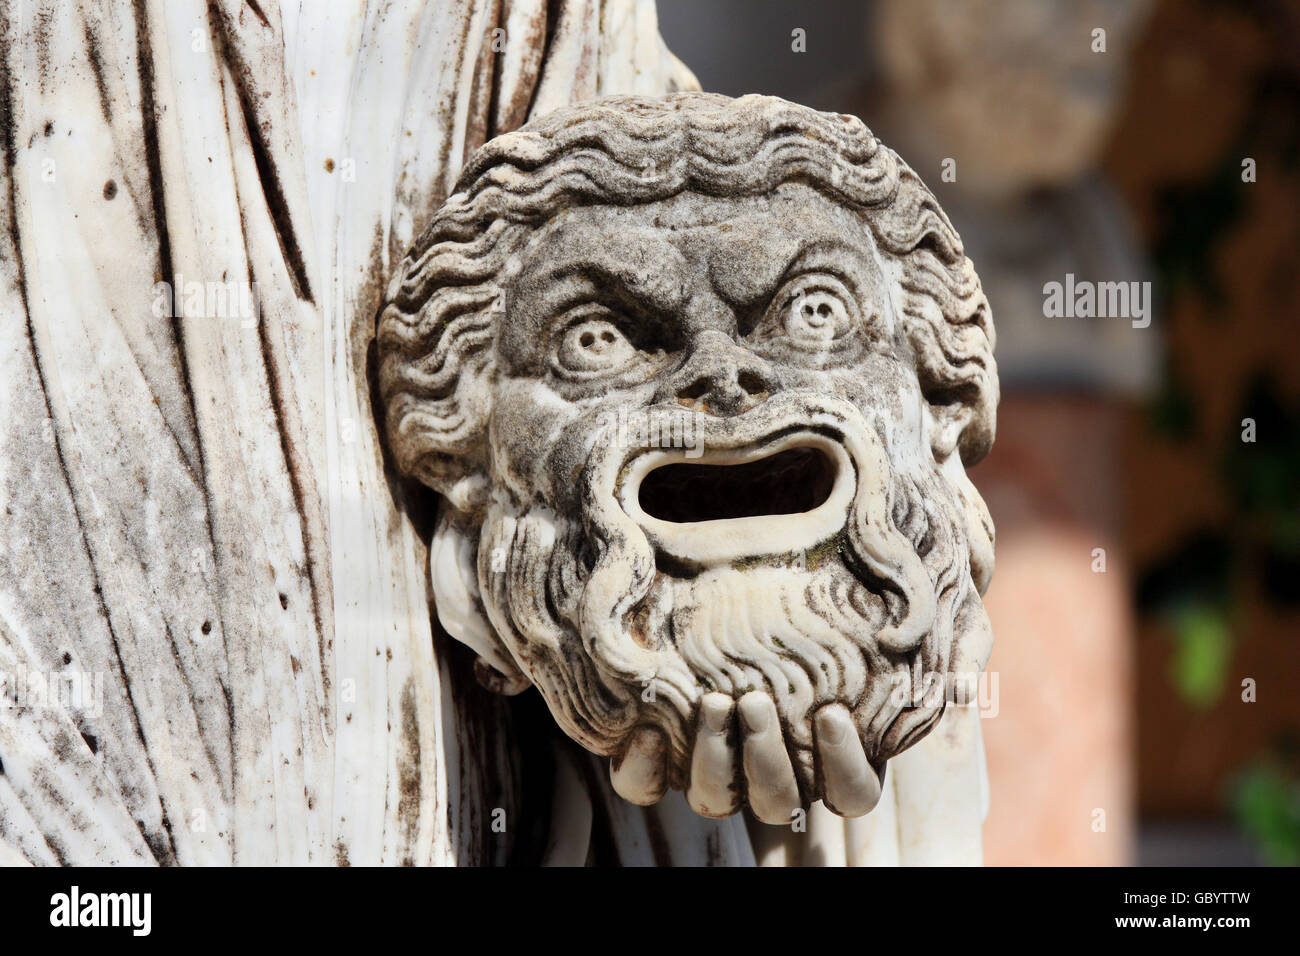 A tragic mask in the hand of Statue of Melpomene, the muse of tragedy, on the balcony of Achillion princess Sissy's palace on gr Stock Photo